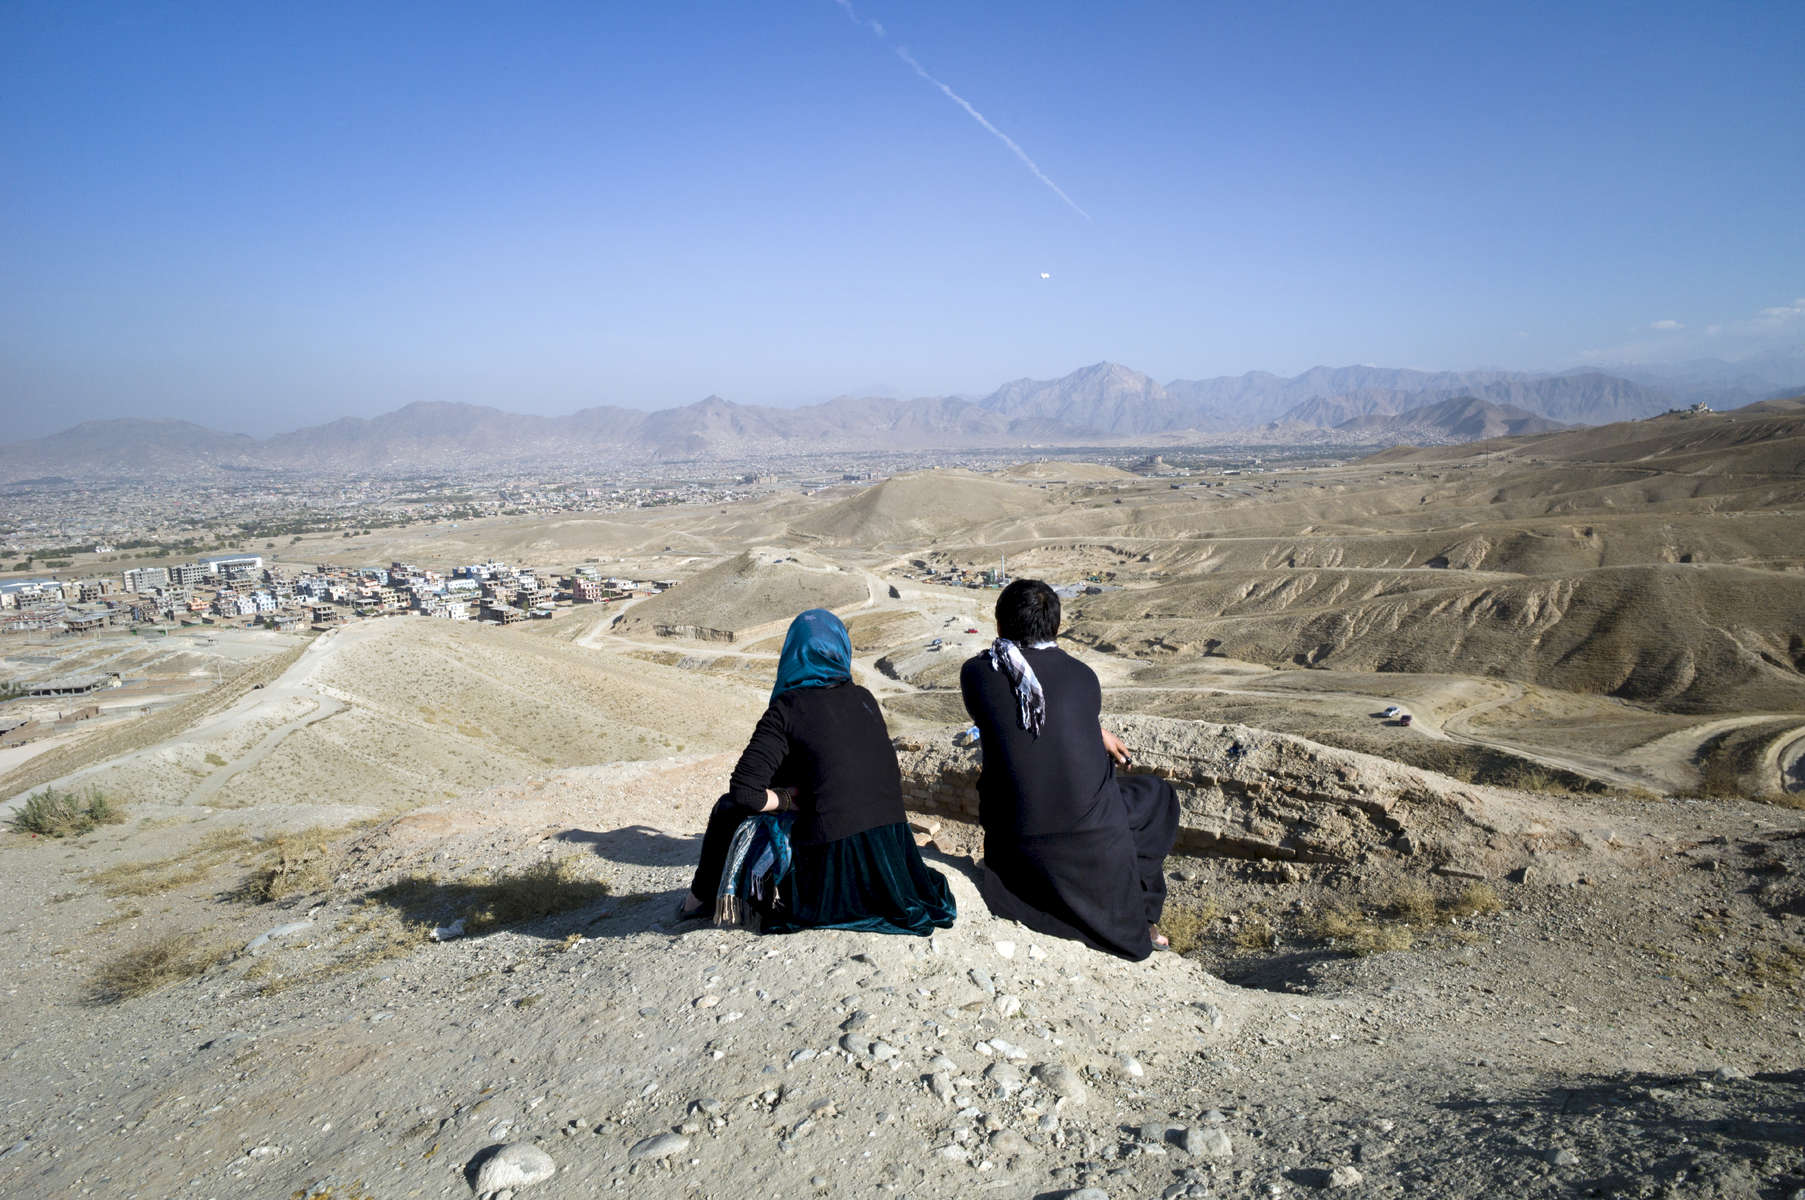 Farkhonda and her friend Abas, Kabul, AFGHANISTAN October 2012